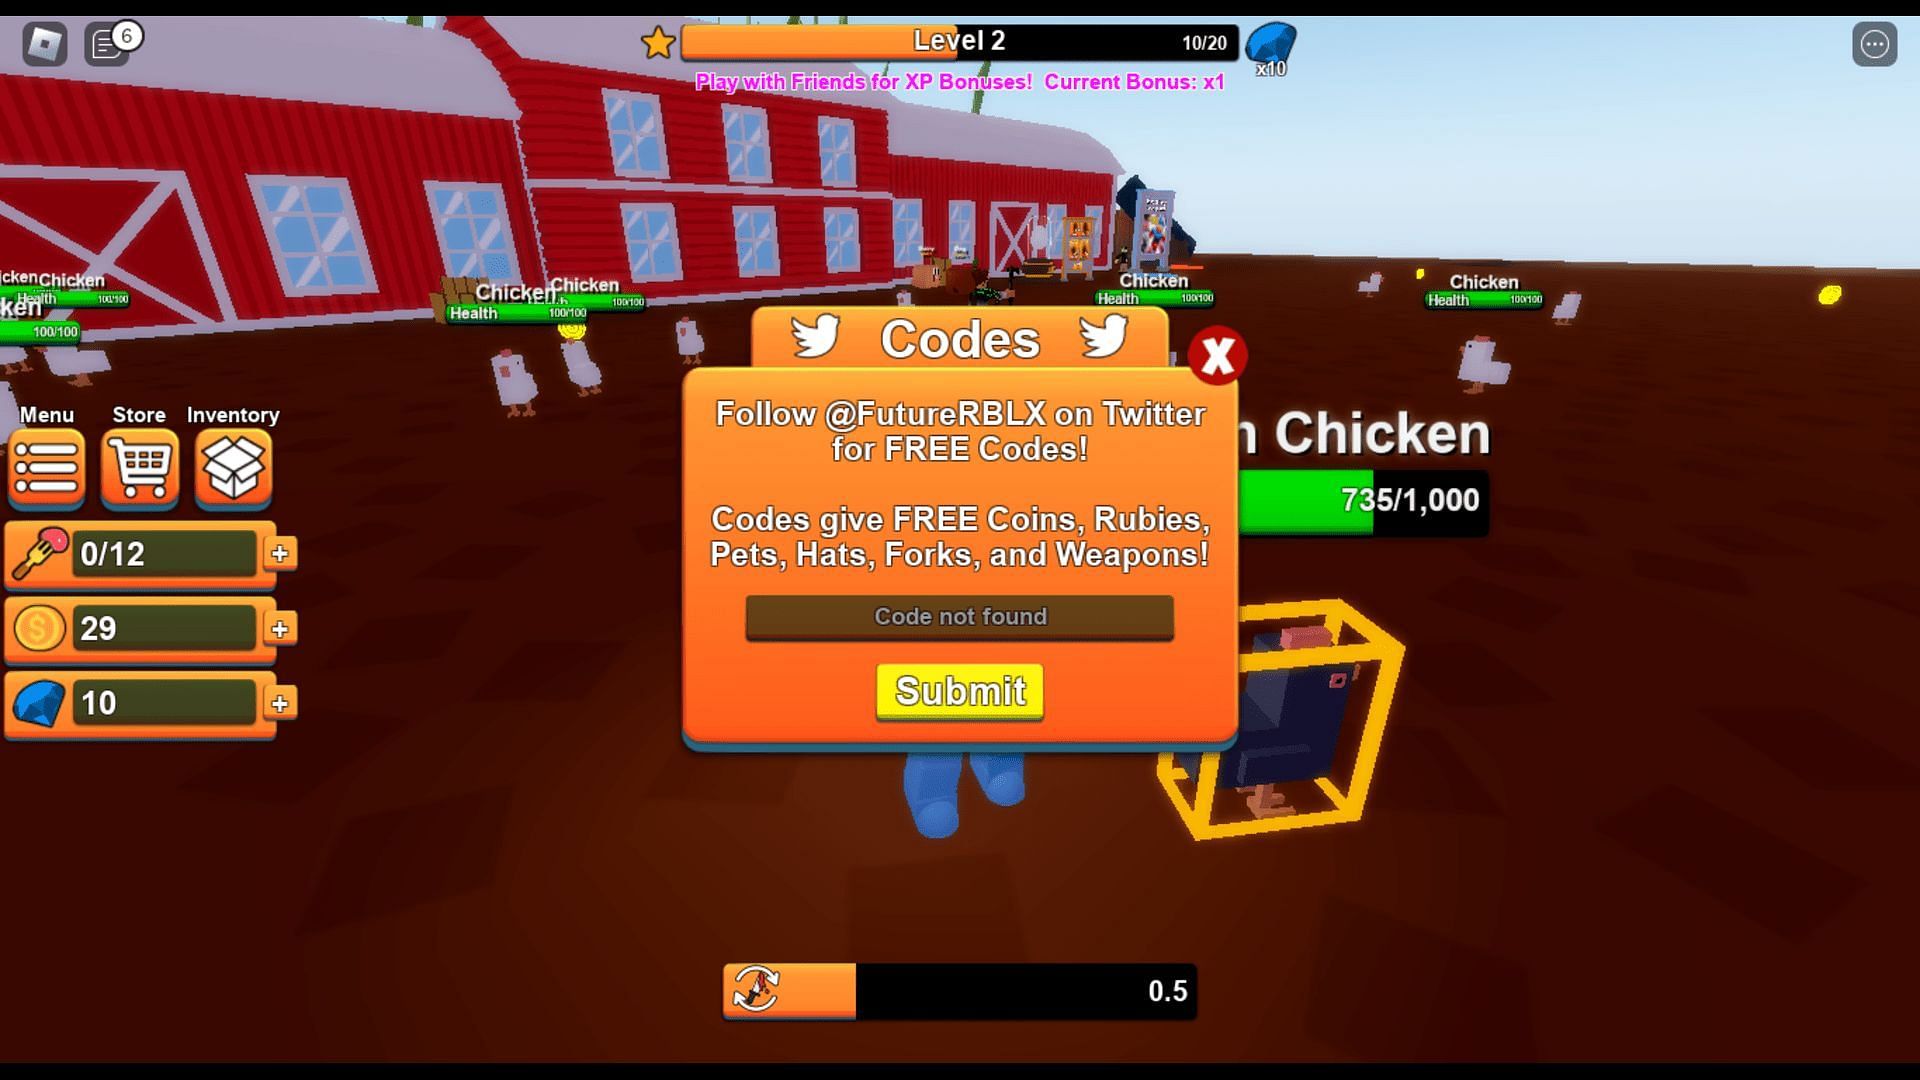 Troubleshoot codes in Sizzling Simulator with ease (Image via Roblox)